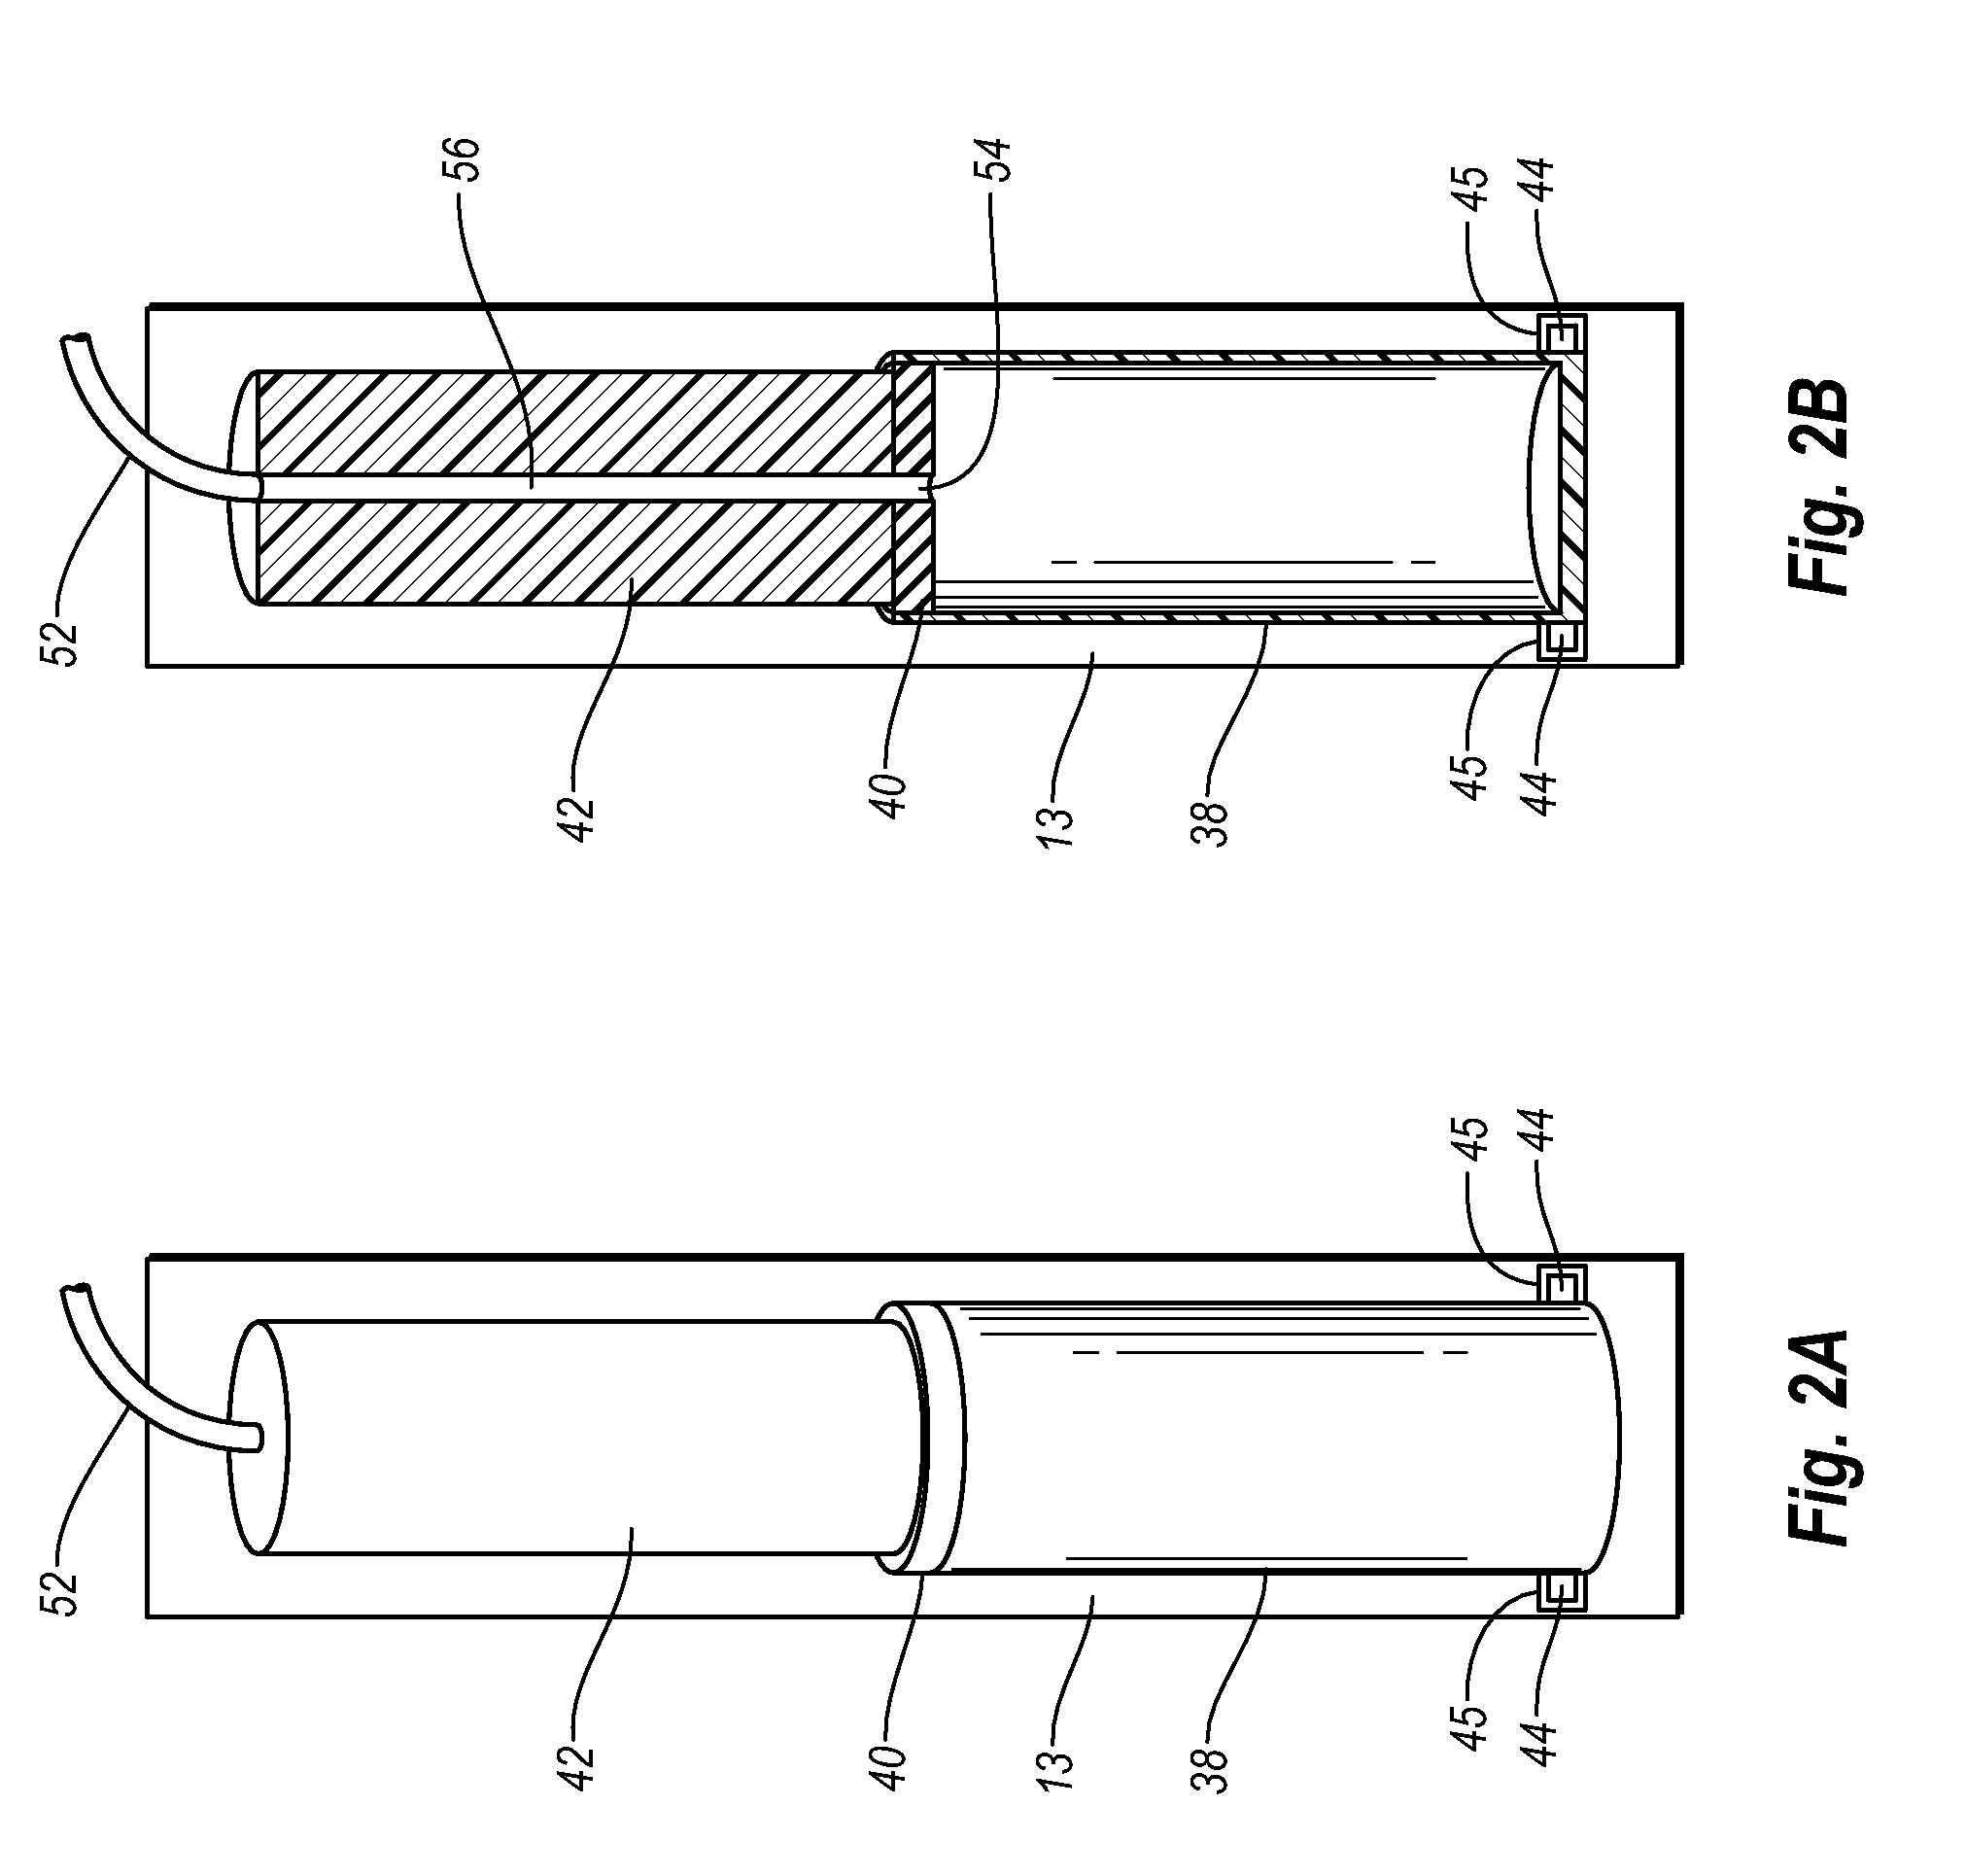 Emergency medication pump injection system